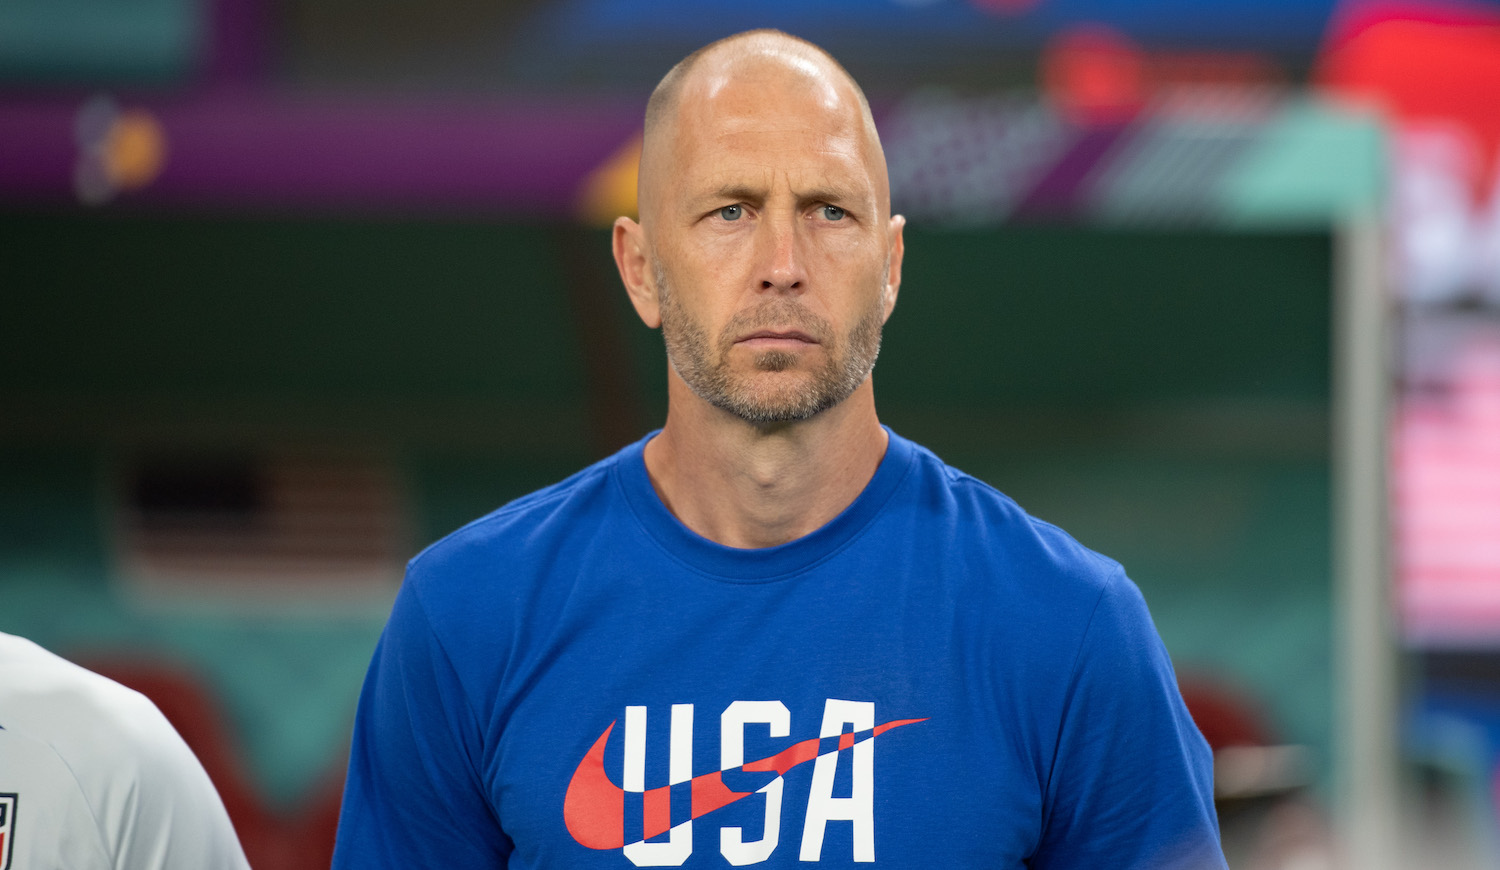 DOHA, QATAR - DECEMBER 3: Greg Berhalter of the United States lines up for the national anthem before a FIFA World Cup Qatar 2022 Round of 16 match between Netherlands and USMNT at Khalifa International Stadium on December 3, 2022 in Doha, Qatar. (Photo by Stephen Nadler/ISI Photos/Getty Images)